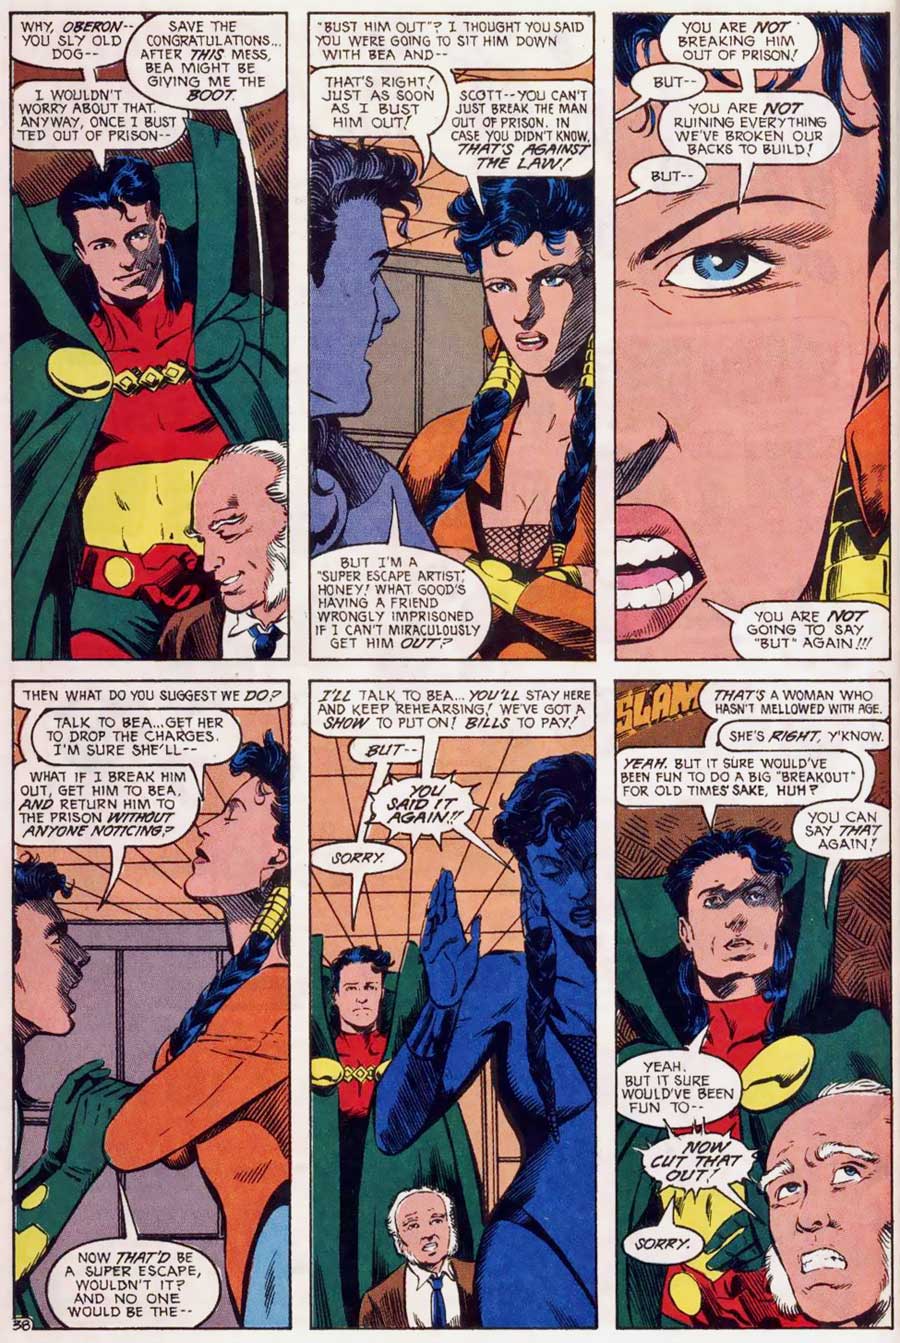 Justice League America Annual #5 by Keith Giffen, J.M. DeMatteis, Joe Phillips and Bruce Patterson